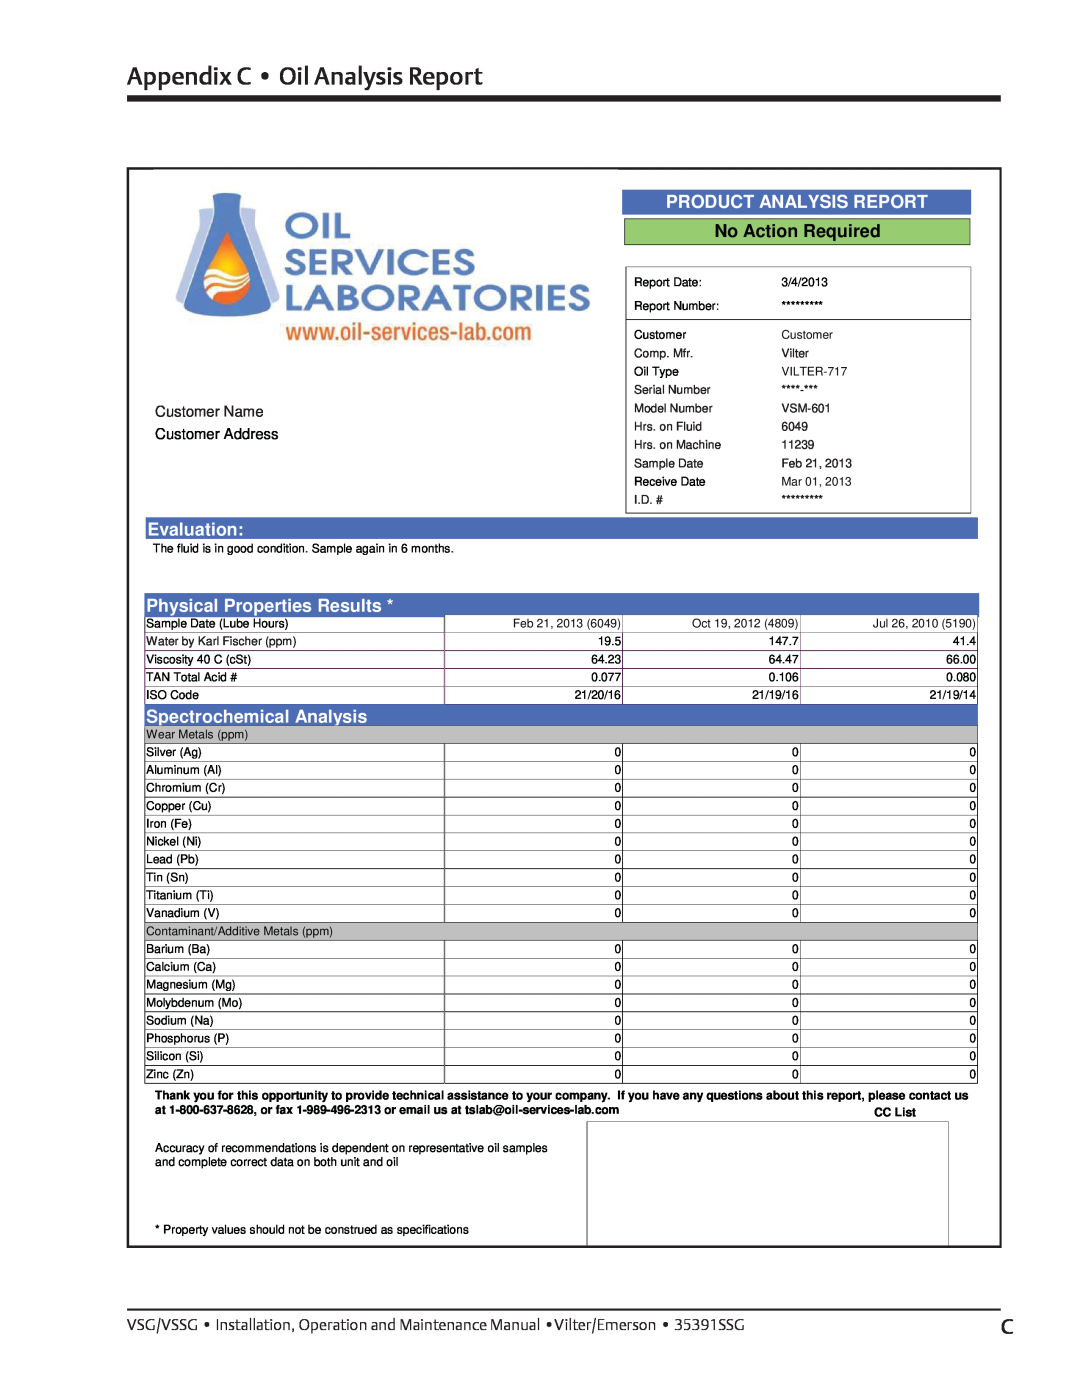 Emerson VSG, VSSG Appendix C Oil Analysis Report, Evaluation, Product Analysis Report, No Action Required, Customer Name 